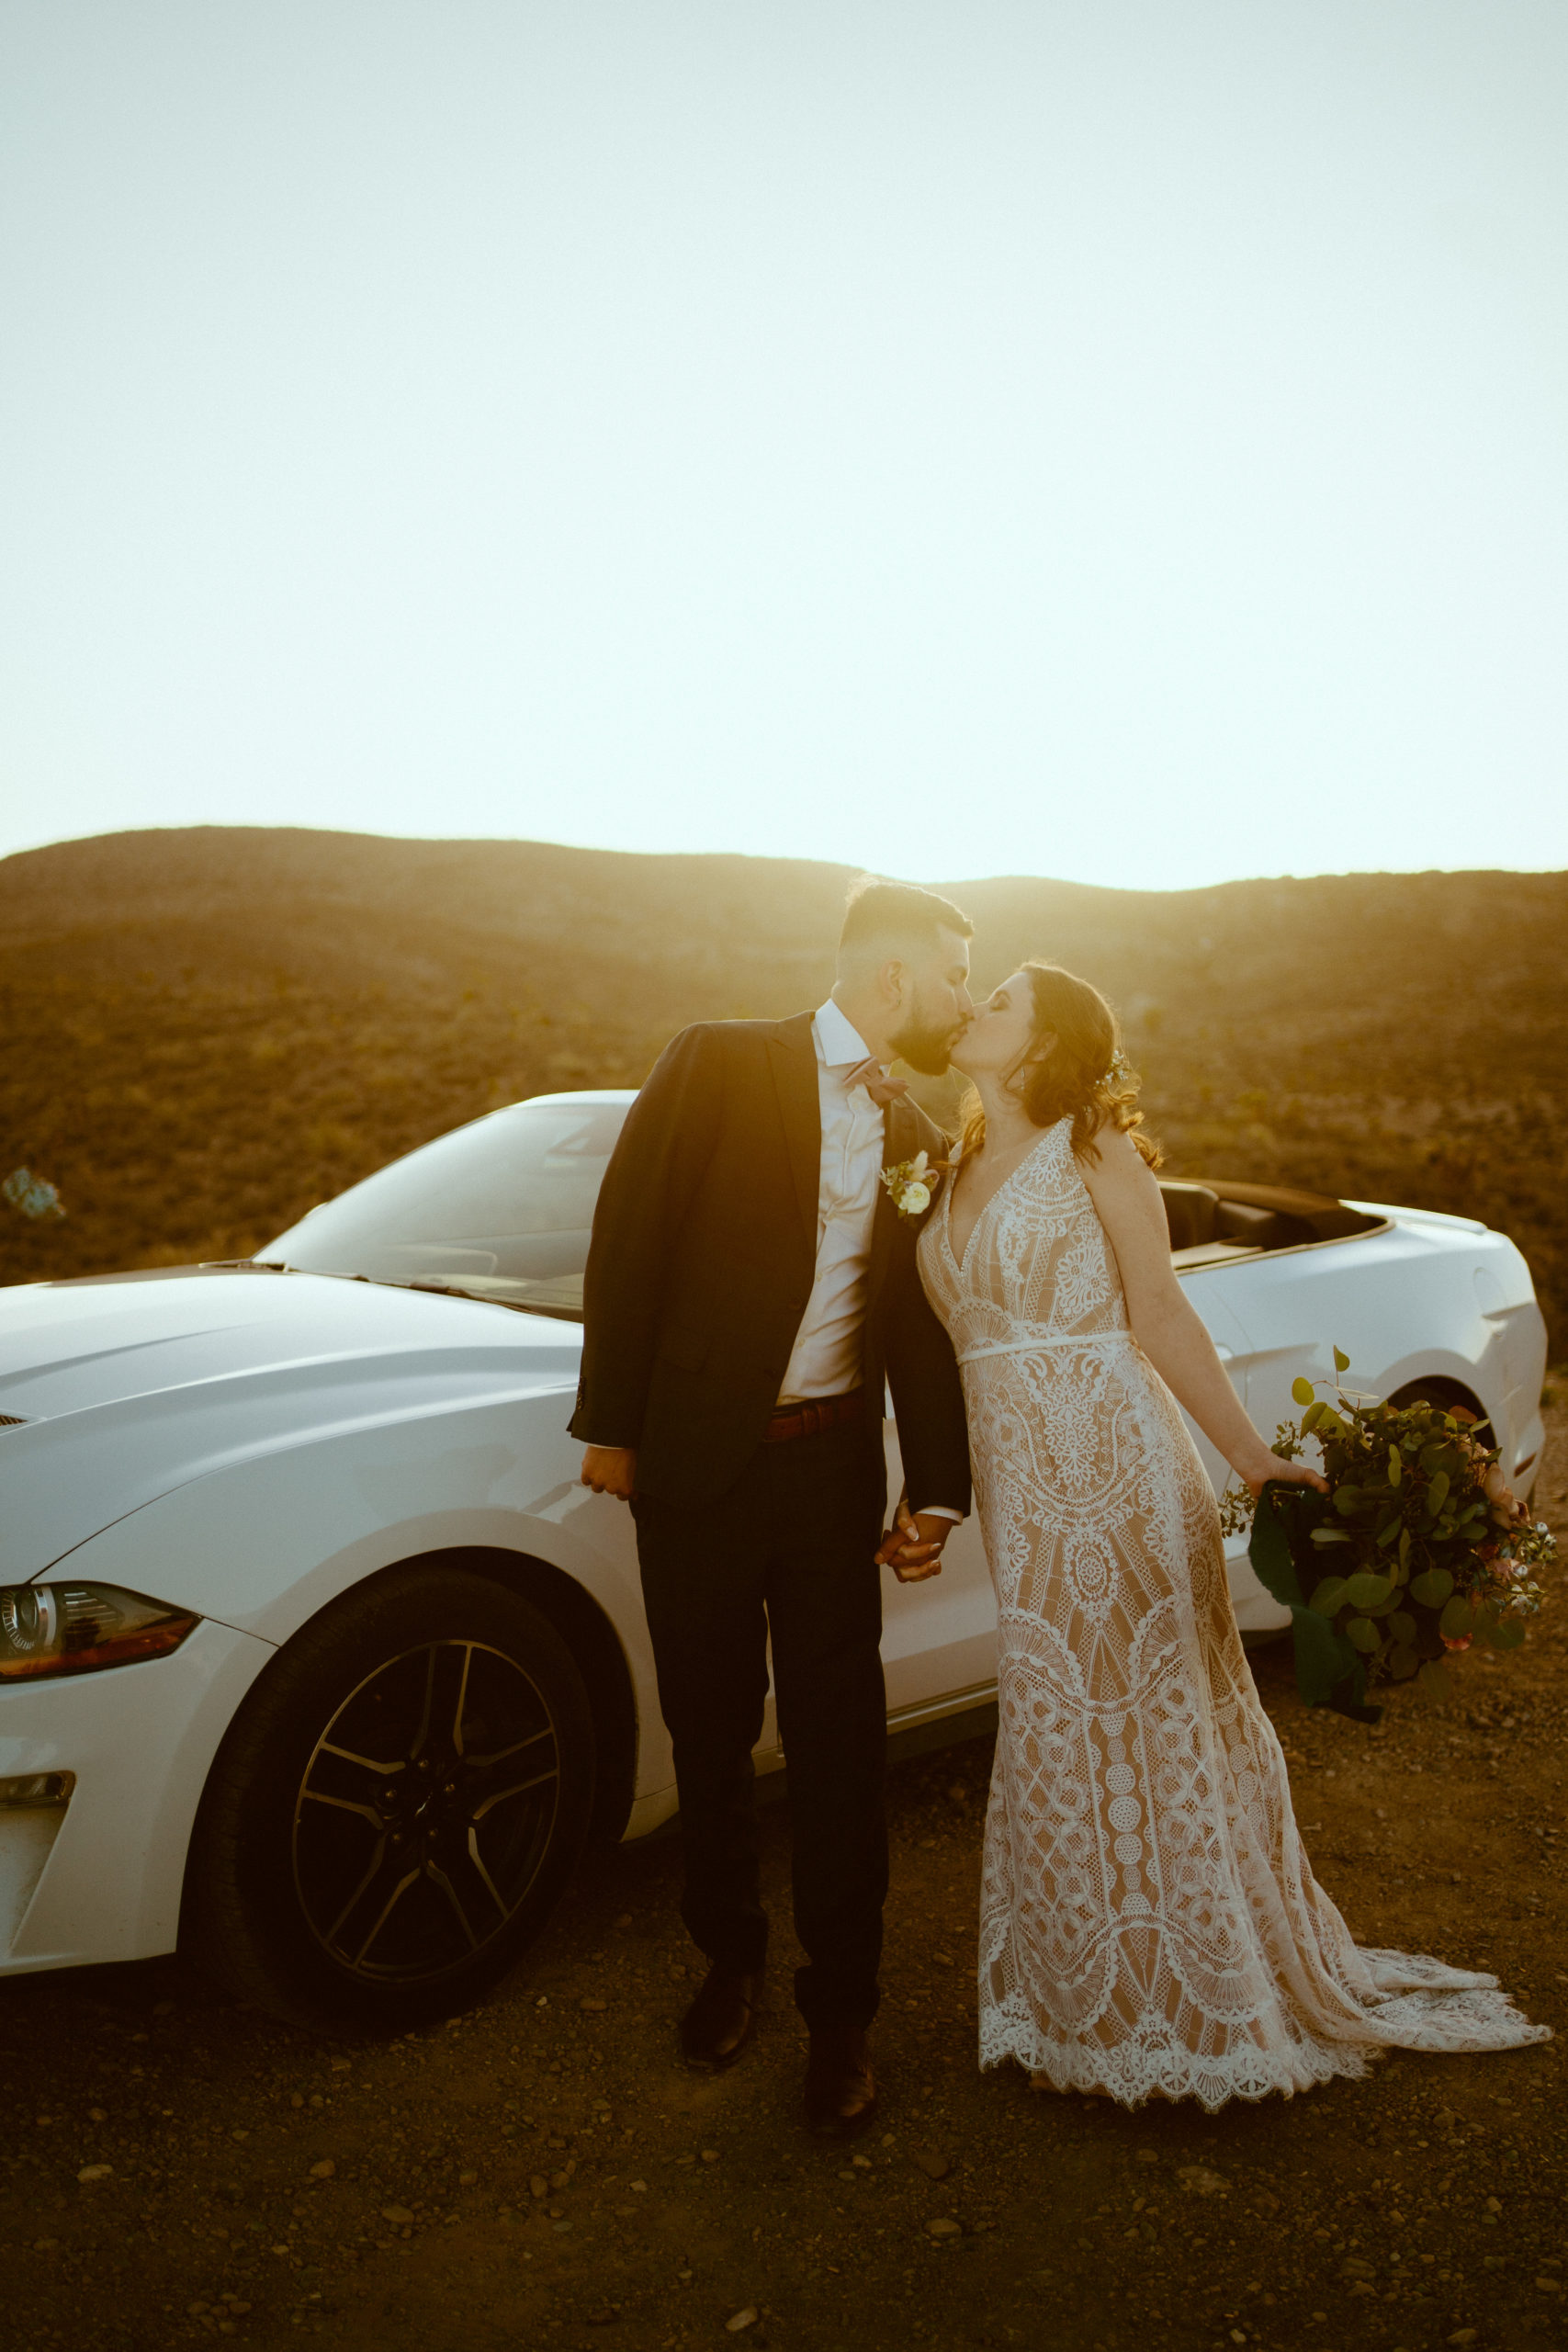 Bride in lace dress with groom next to Mustang 